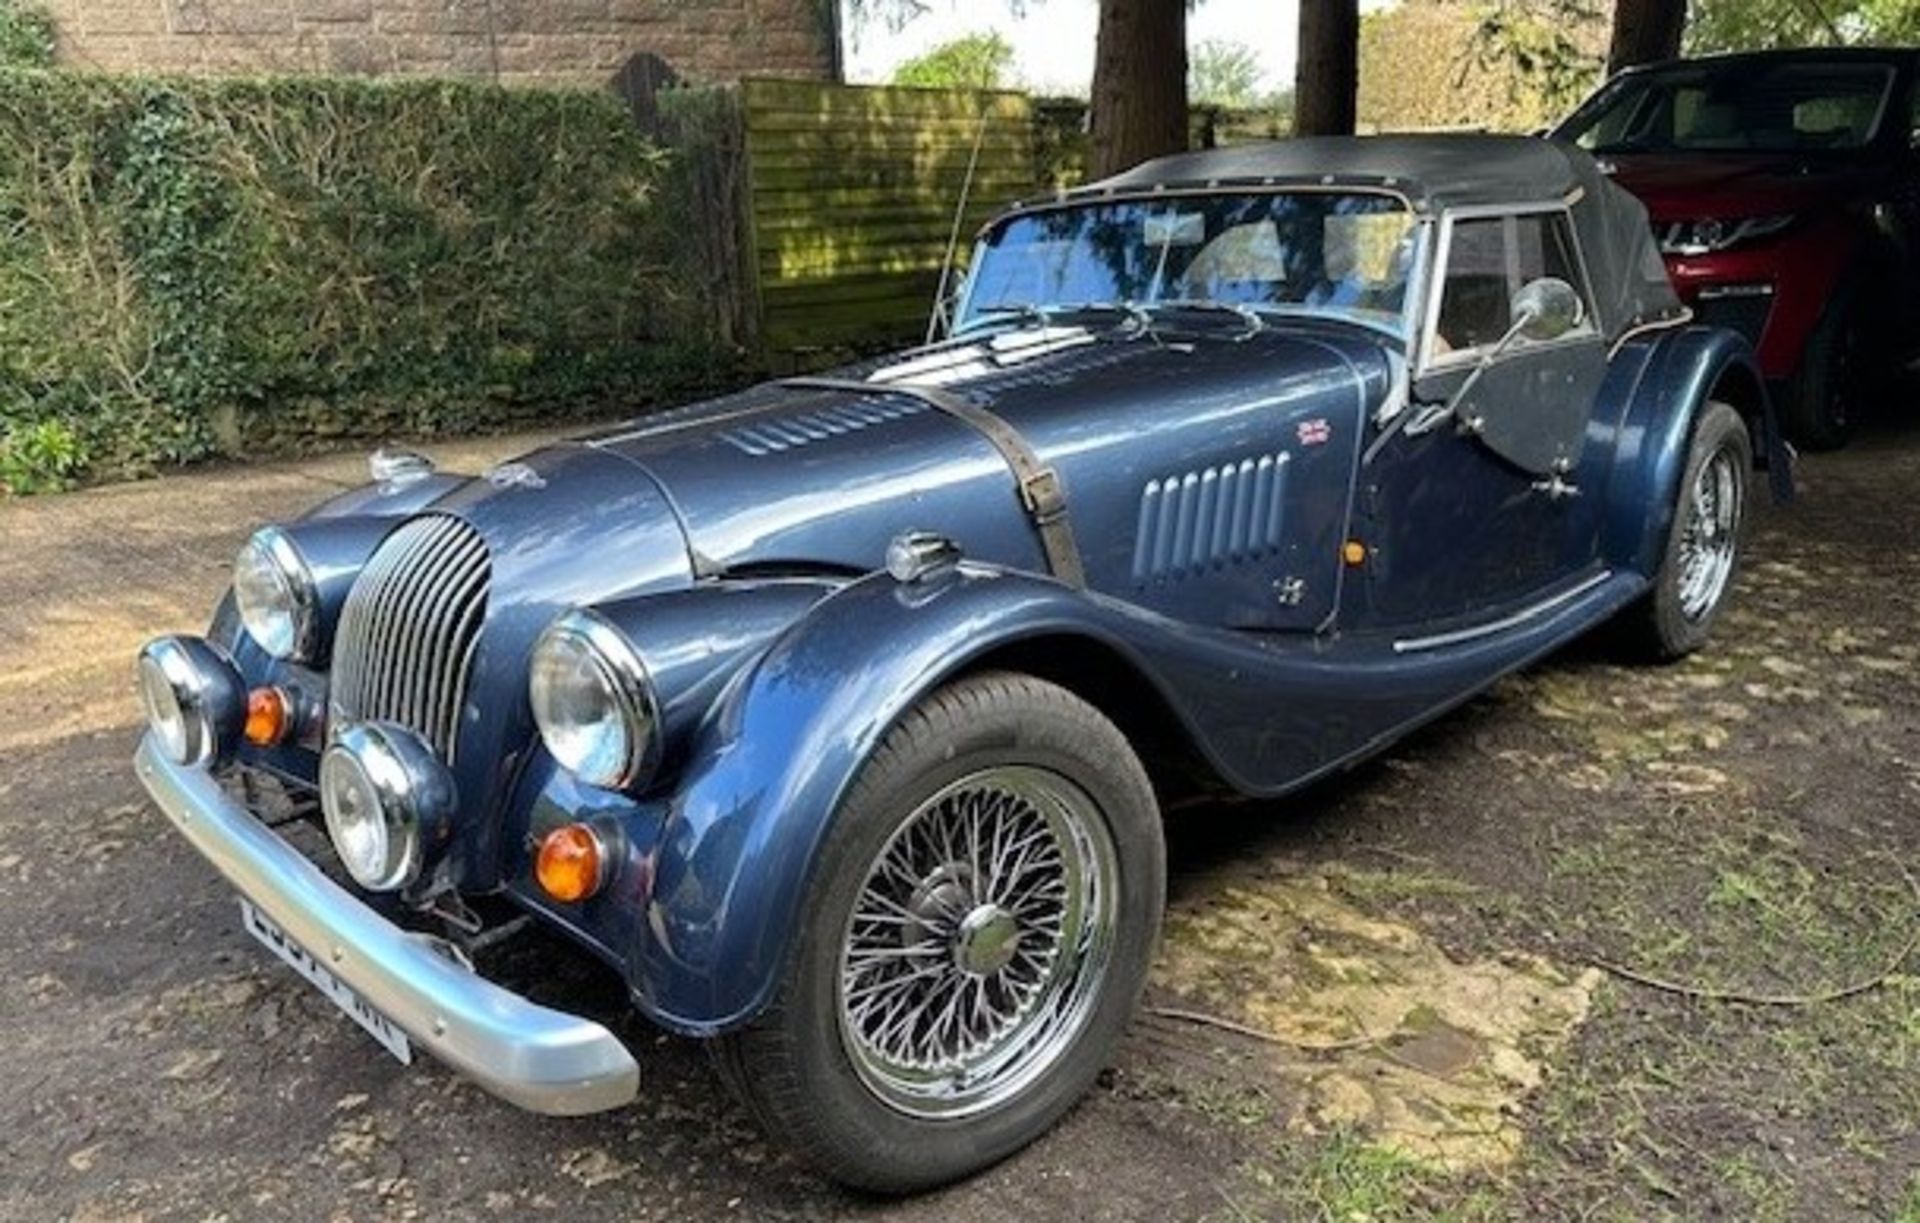 1987 Morgan 4/4 Sports Registration number E557 PWR Chassis number C7463 Engine number 87E28B-